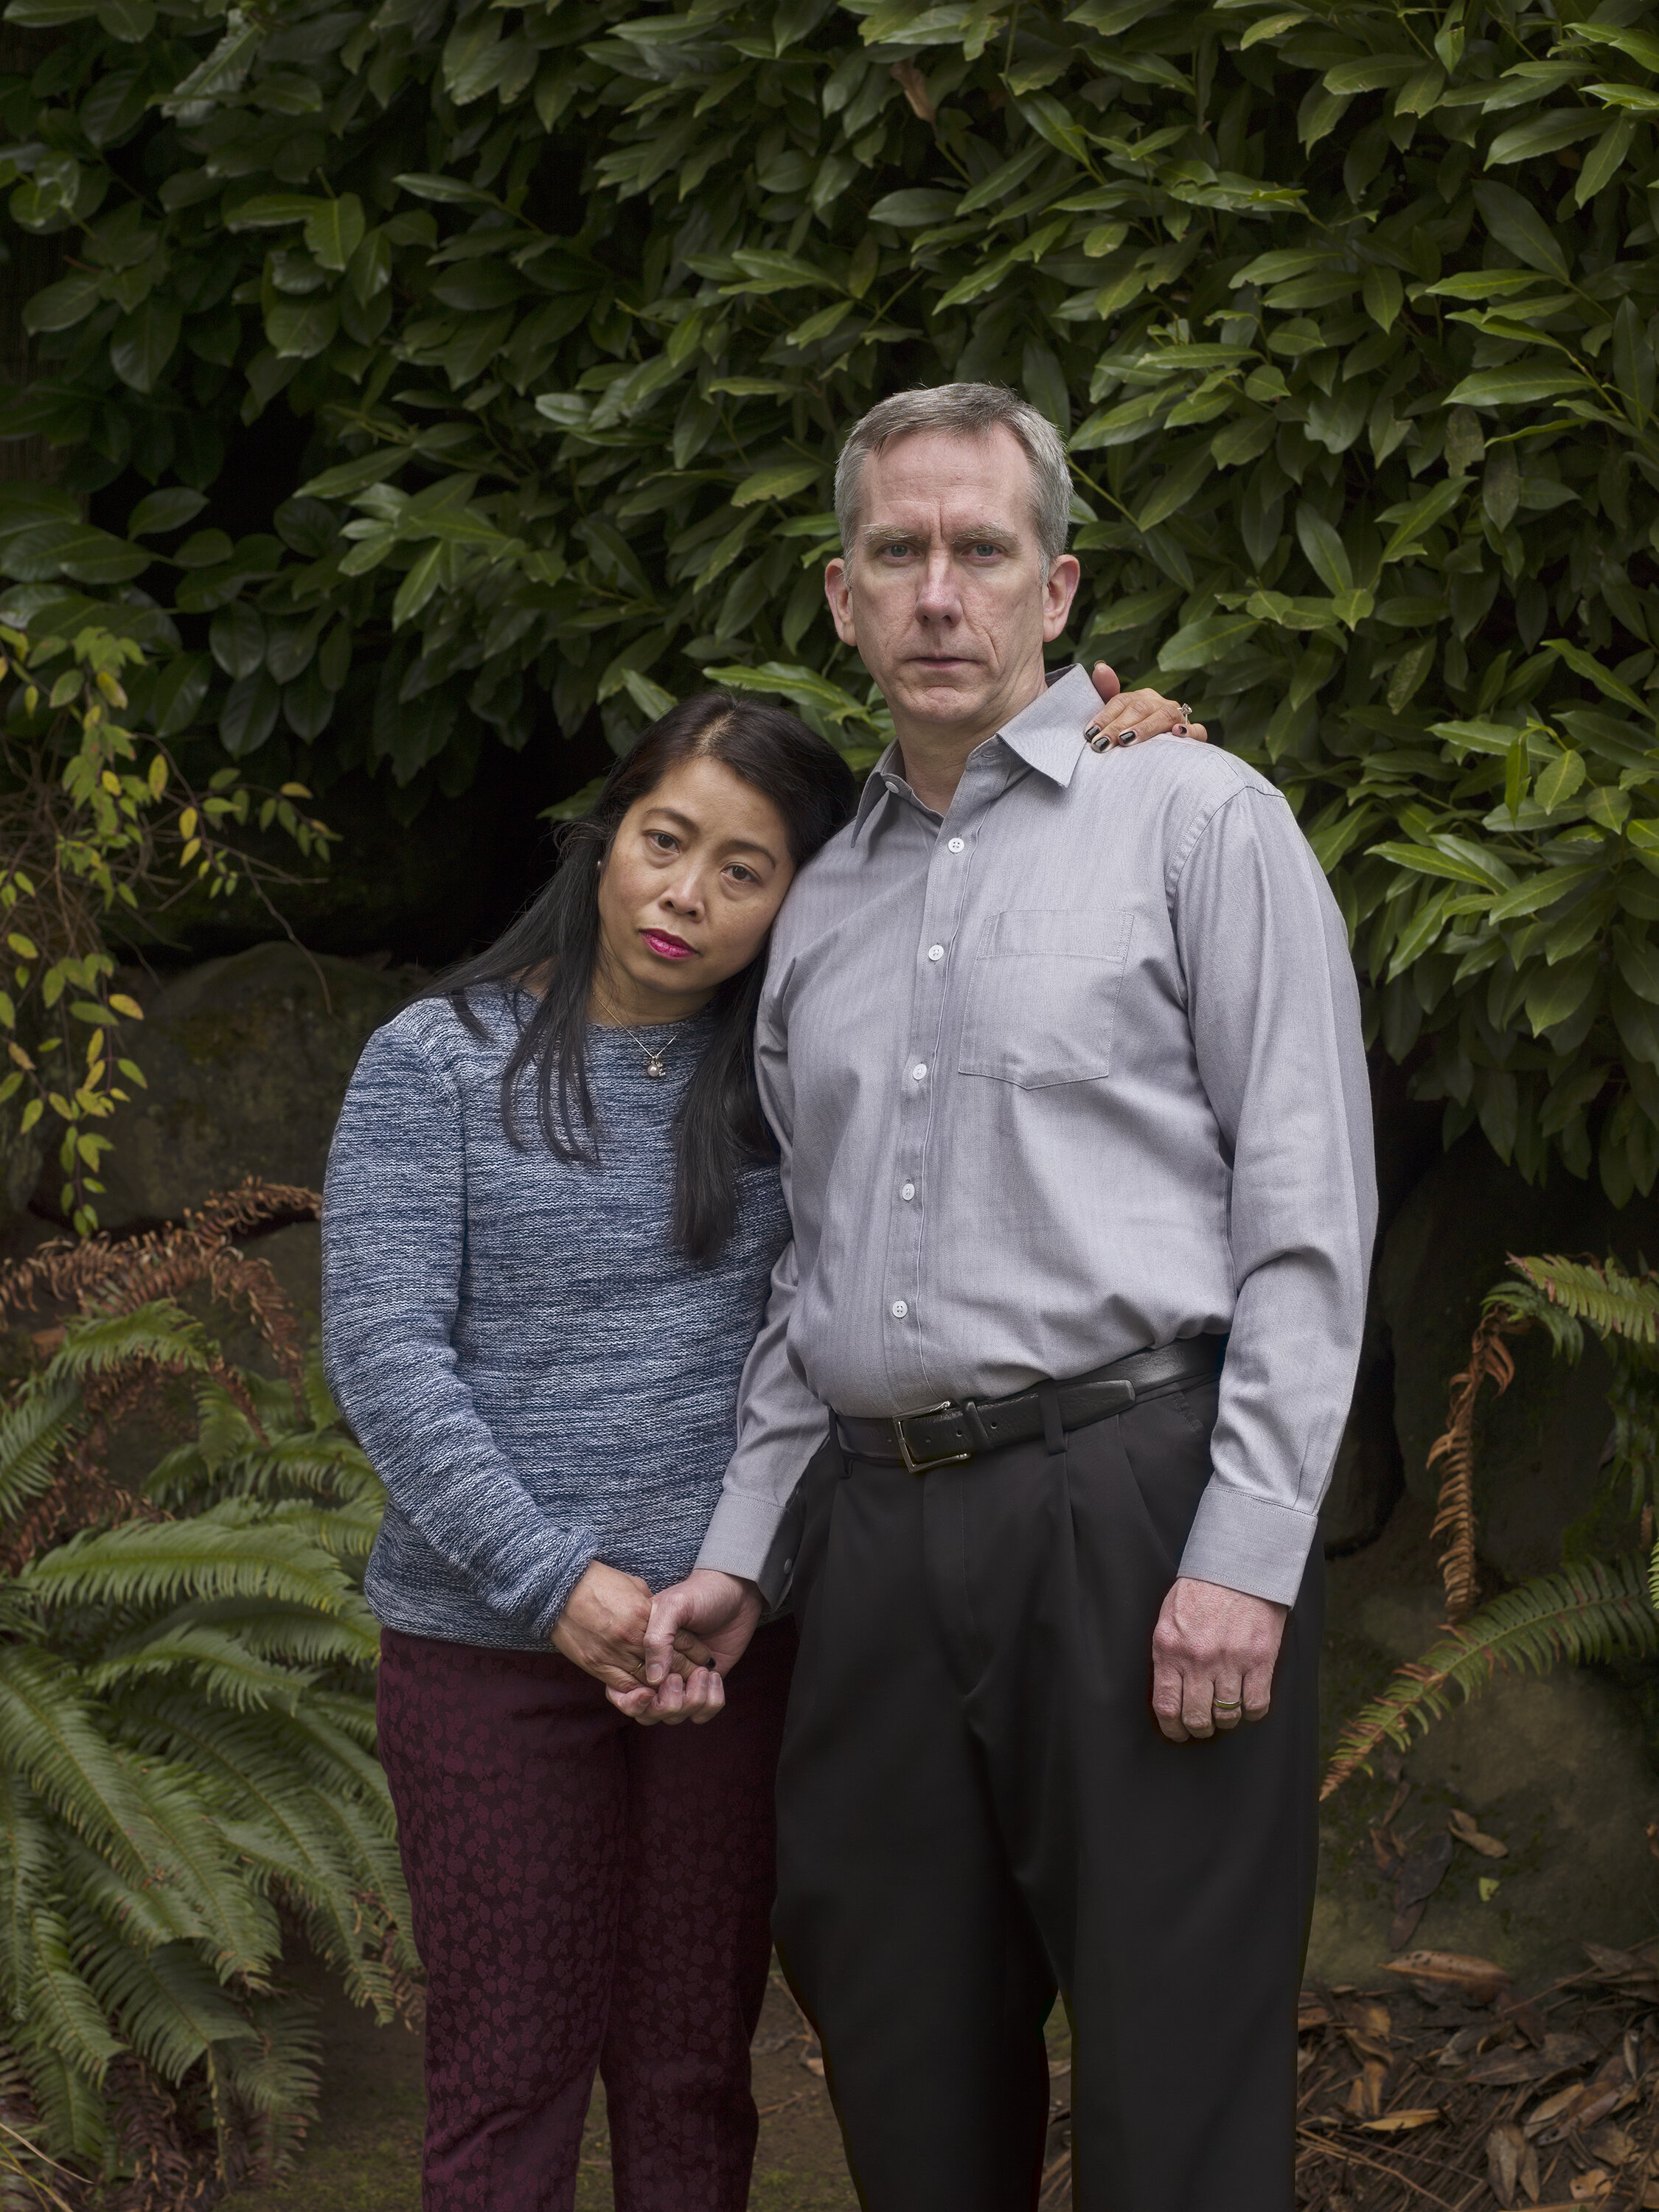  Joylyn and Dan Wright, whose son Ezra was convicted of a sex crime as part of an online sting operation, for  The New York Times Magazine , 2020.  